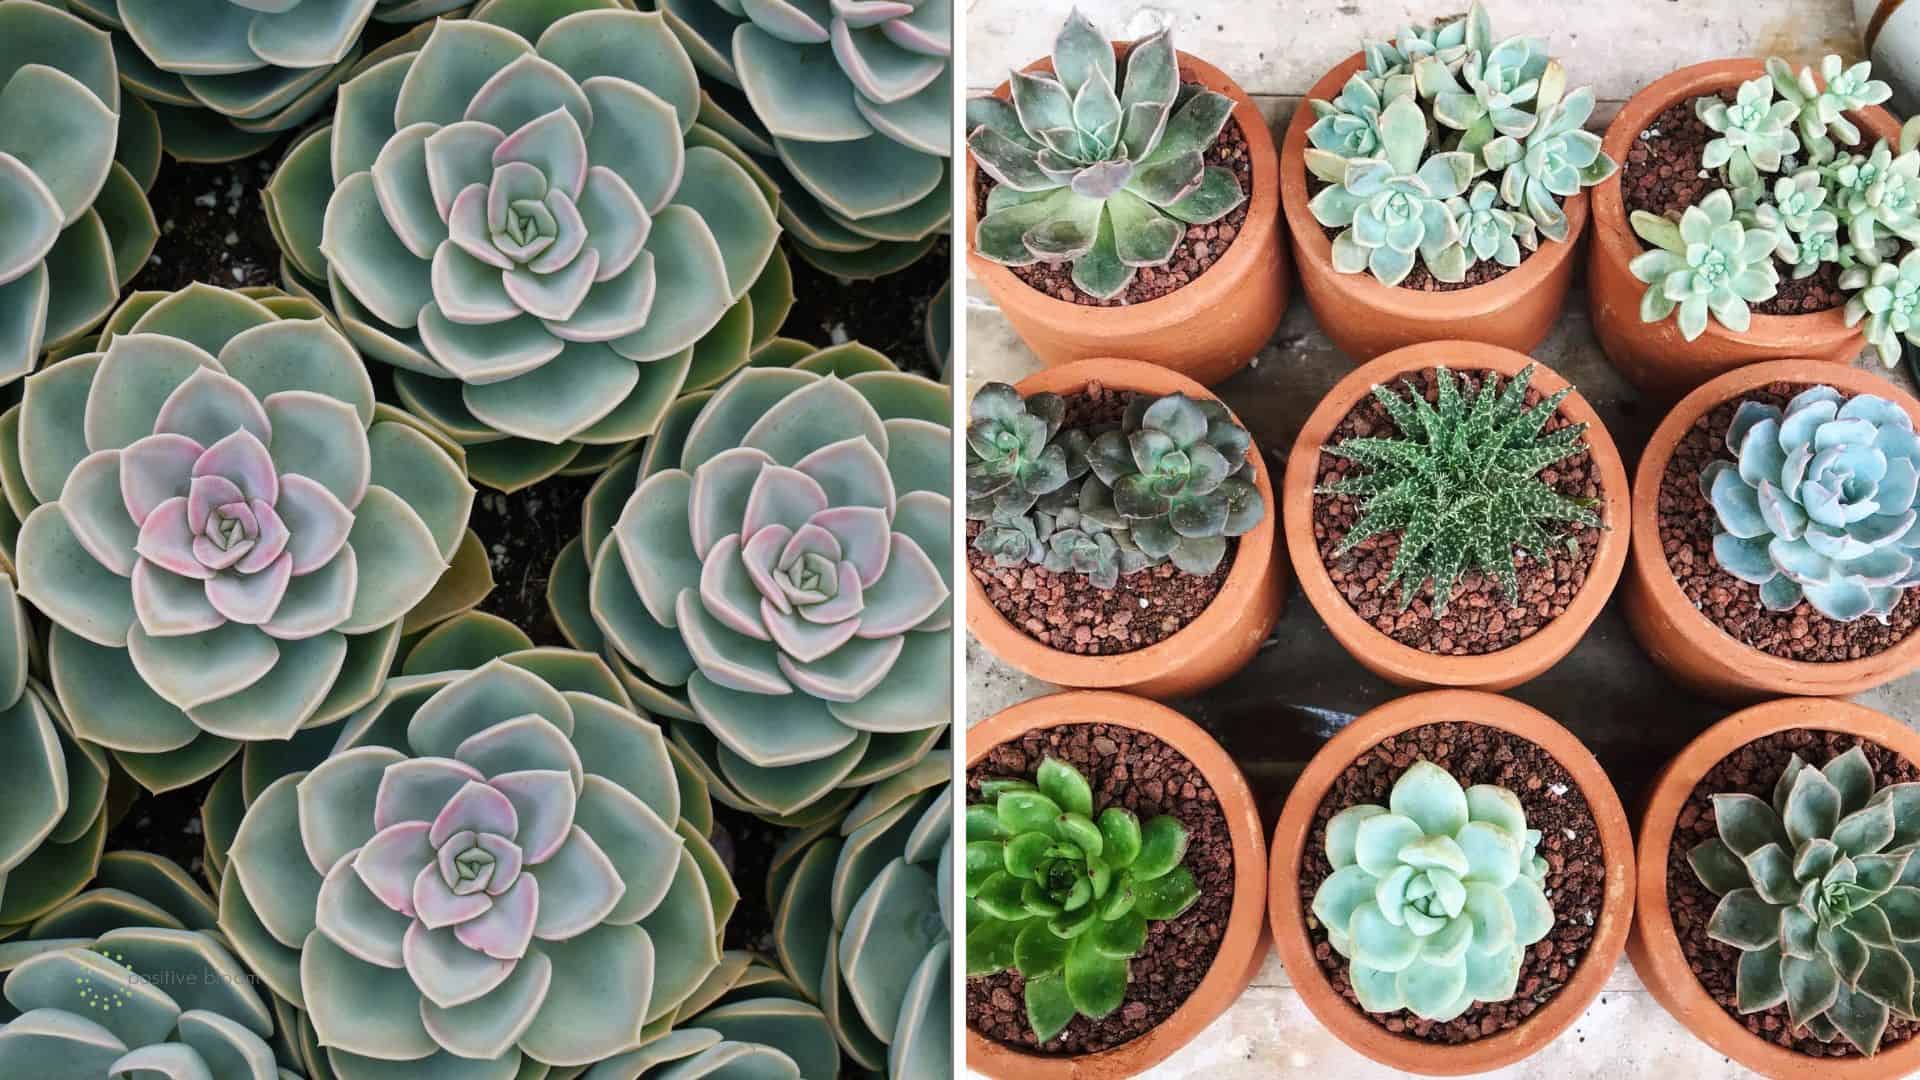 From Smallest To Tallest: How Big Do Succulents Get? 